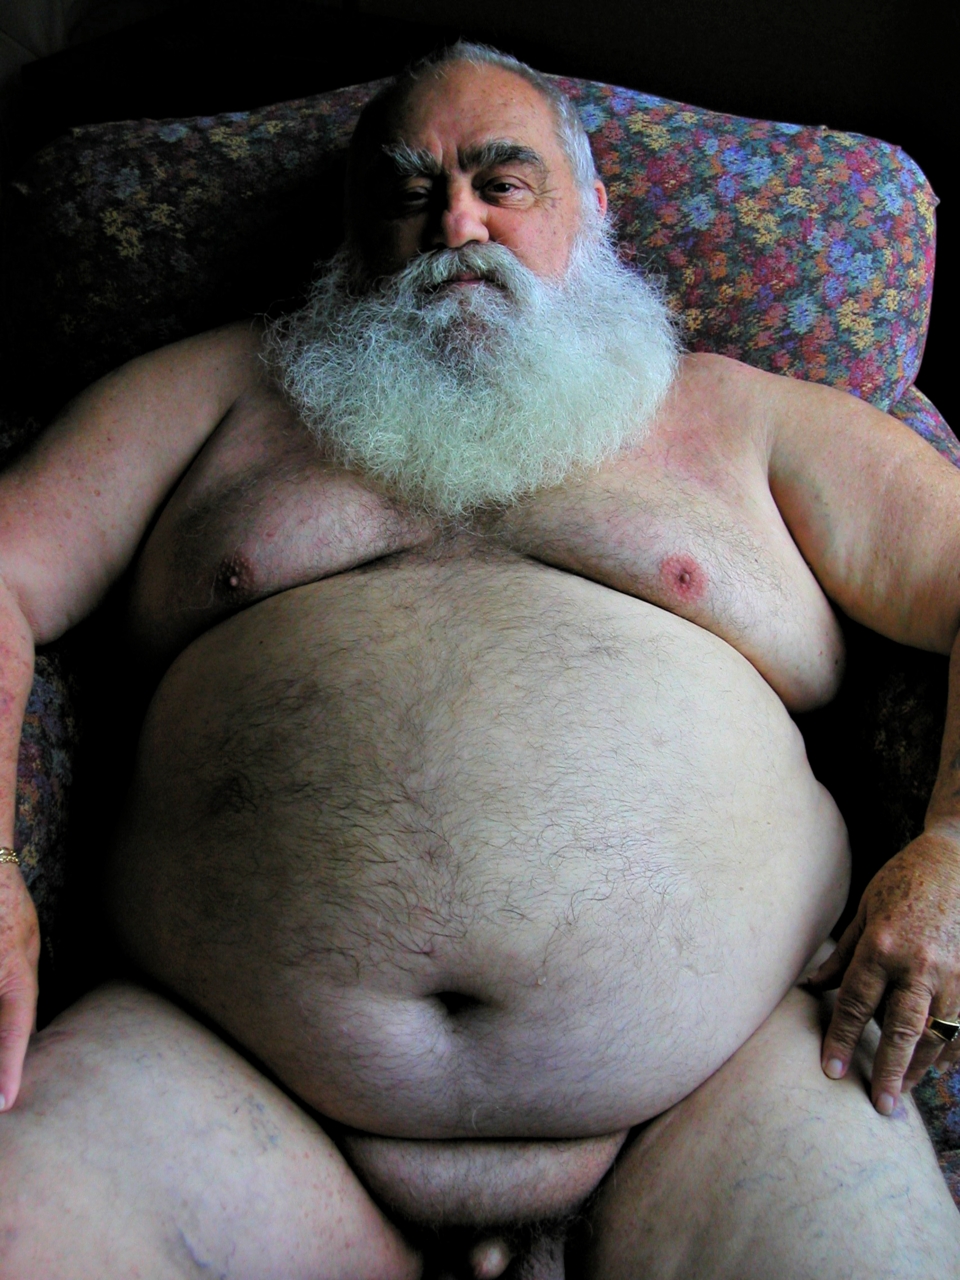 Naked fat man pictures - Nude pic